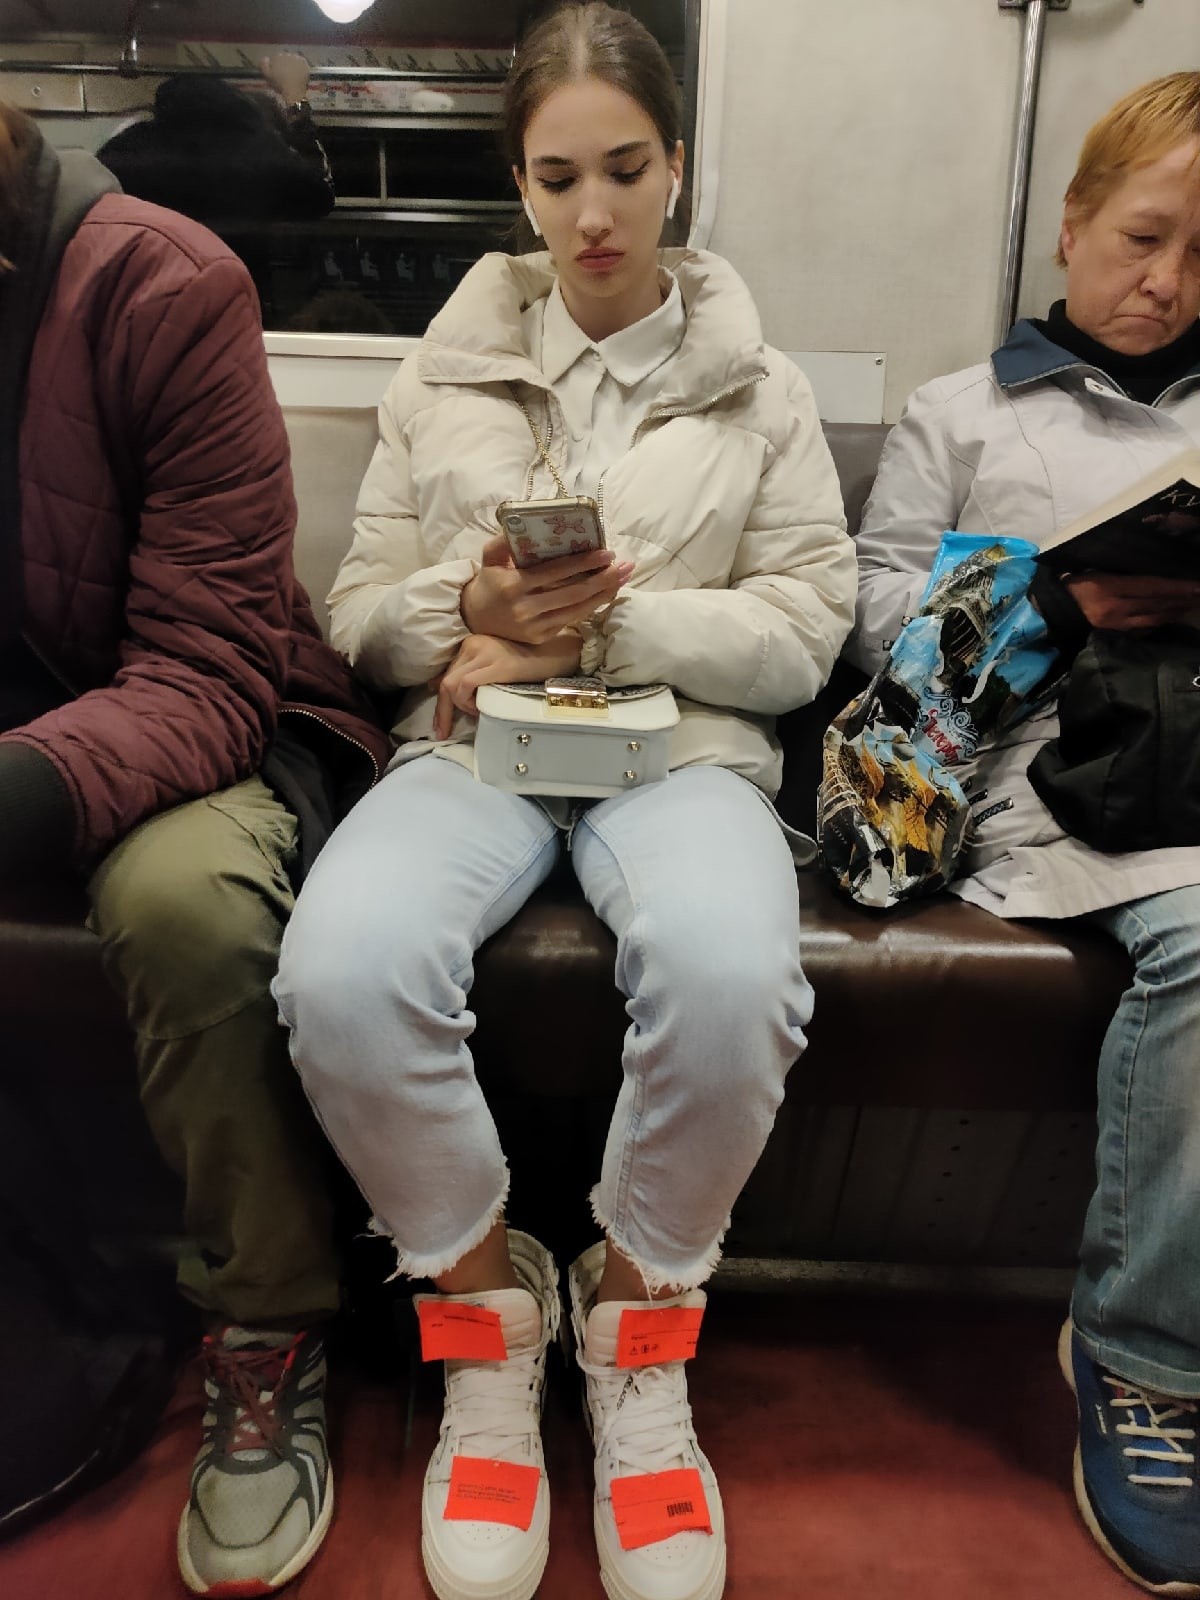 Unusual People In The Subway (22 pics)